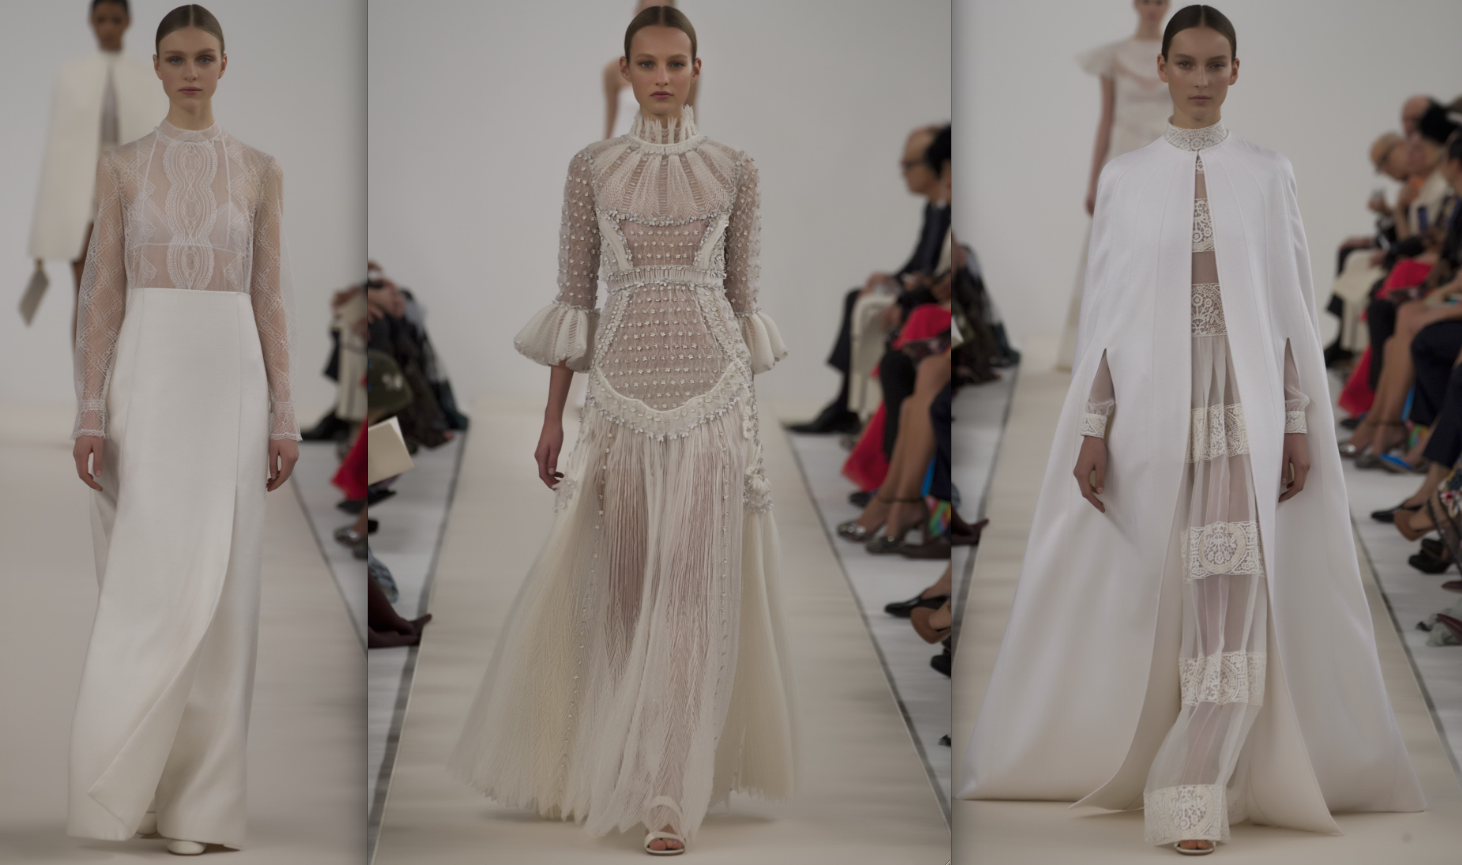 Debuts Winter White Looks Its Haute Couture Show In NYC - Daily Front